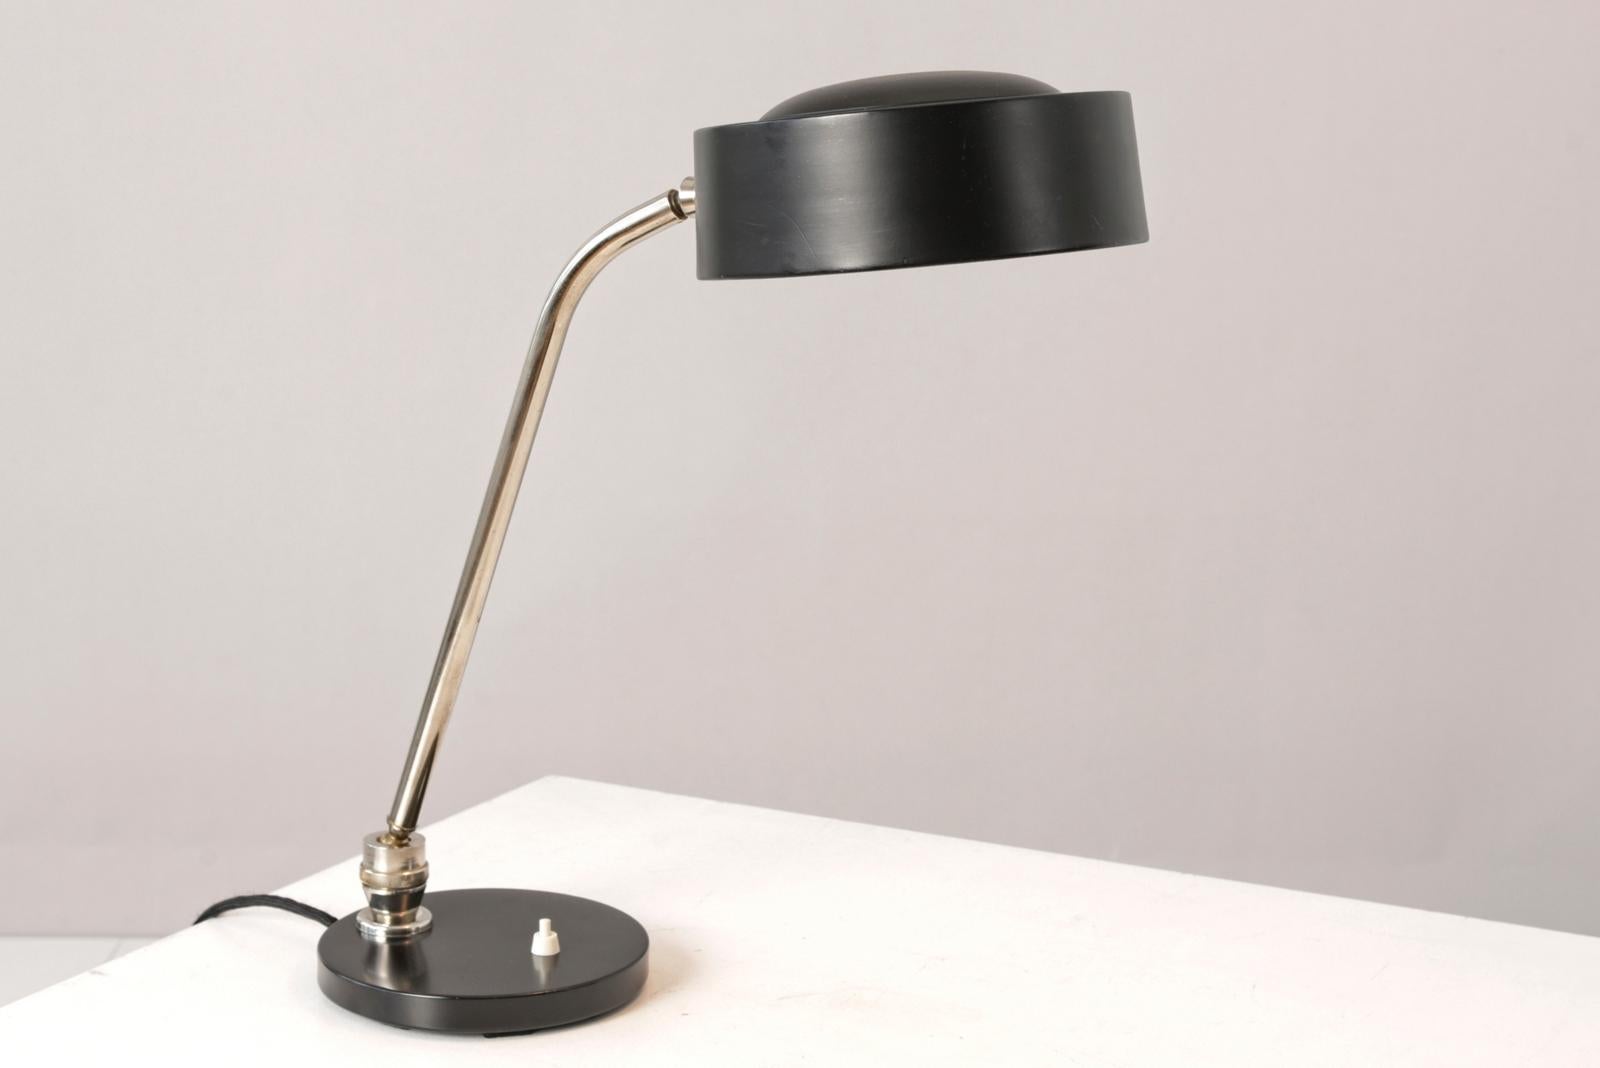 Mid-20th Century Table Lamp by André Mounique and Alain Jujeau for Jumo, France - 1965 For Sale